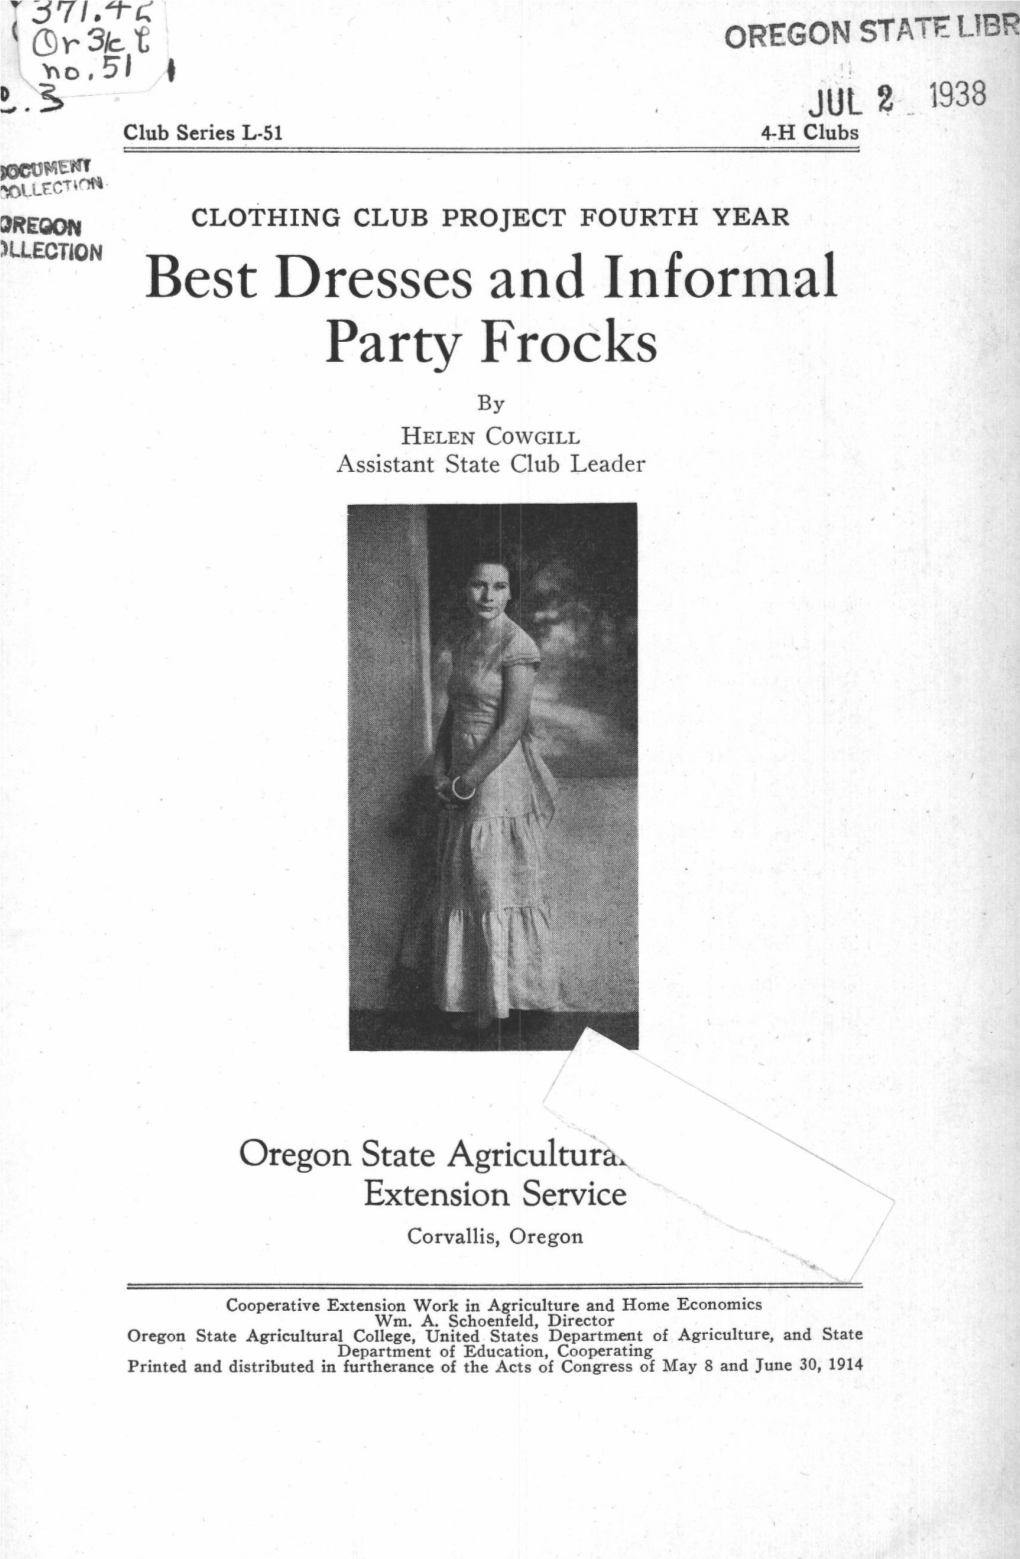 Best Dresses and Informal Party Frocks by HELEN COWGILL Assistant State Club Leader